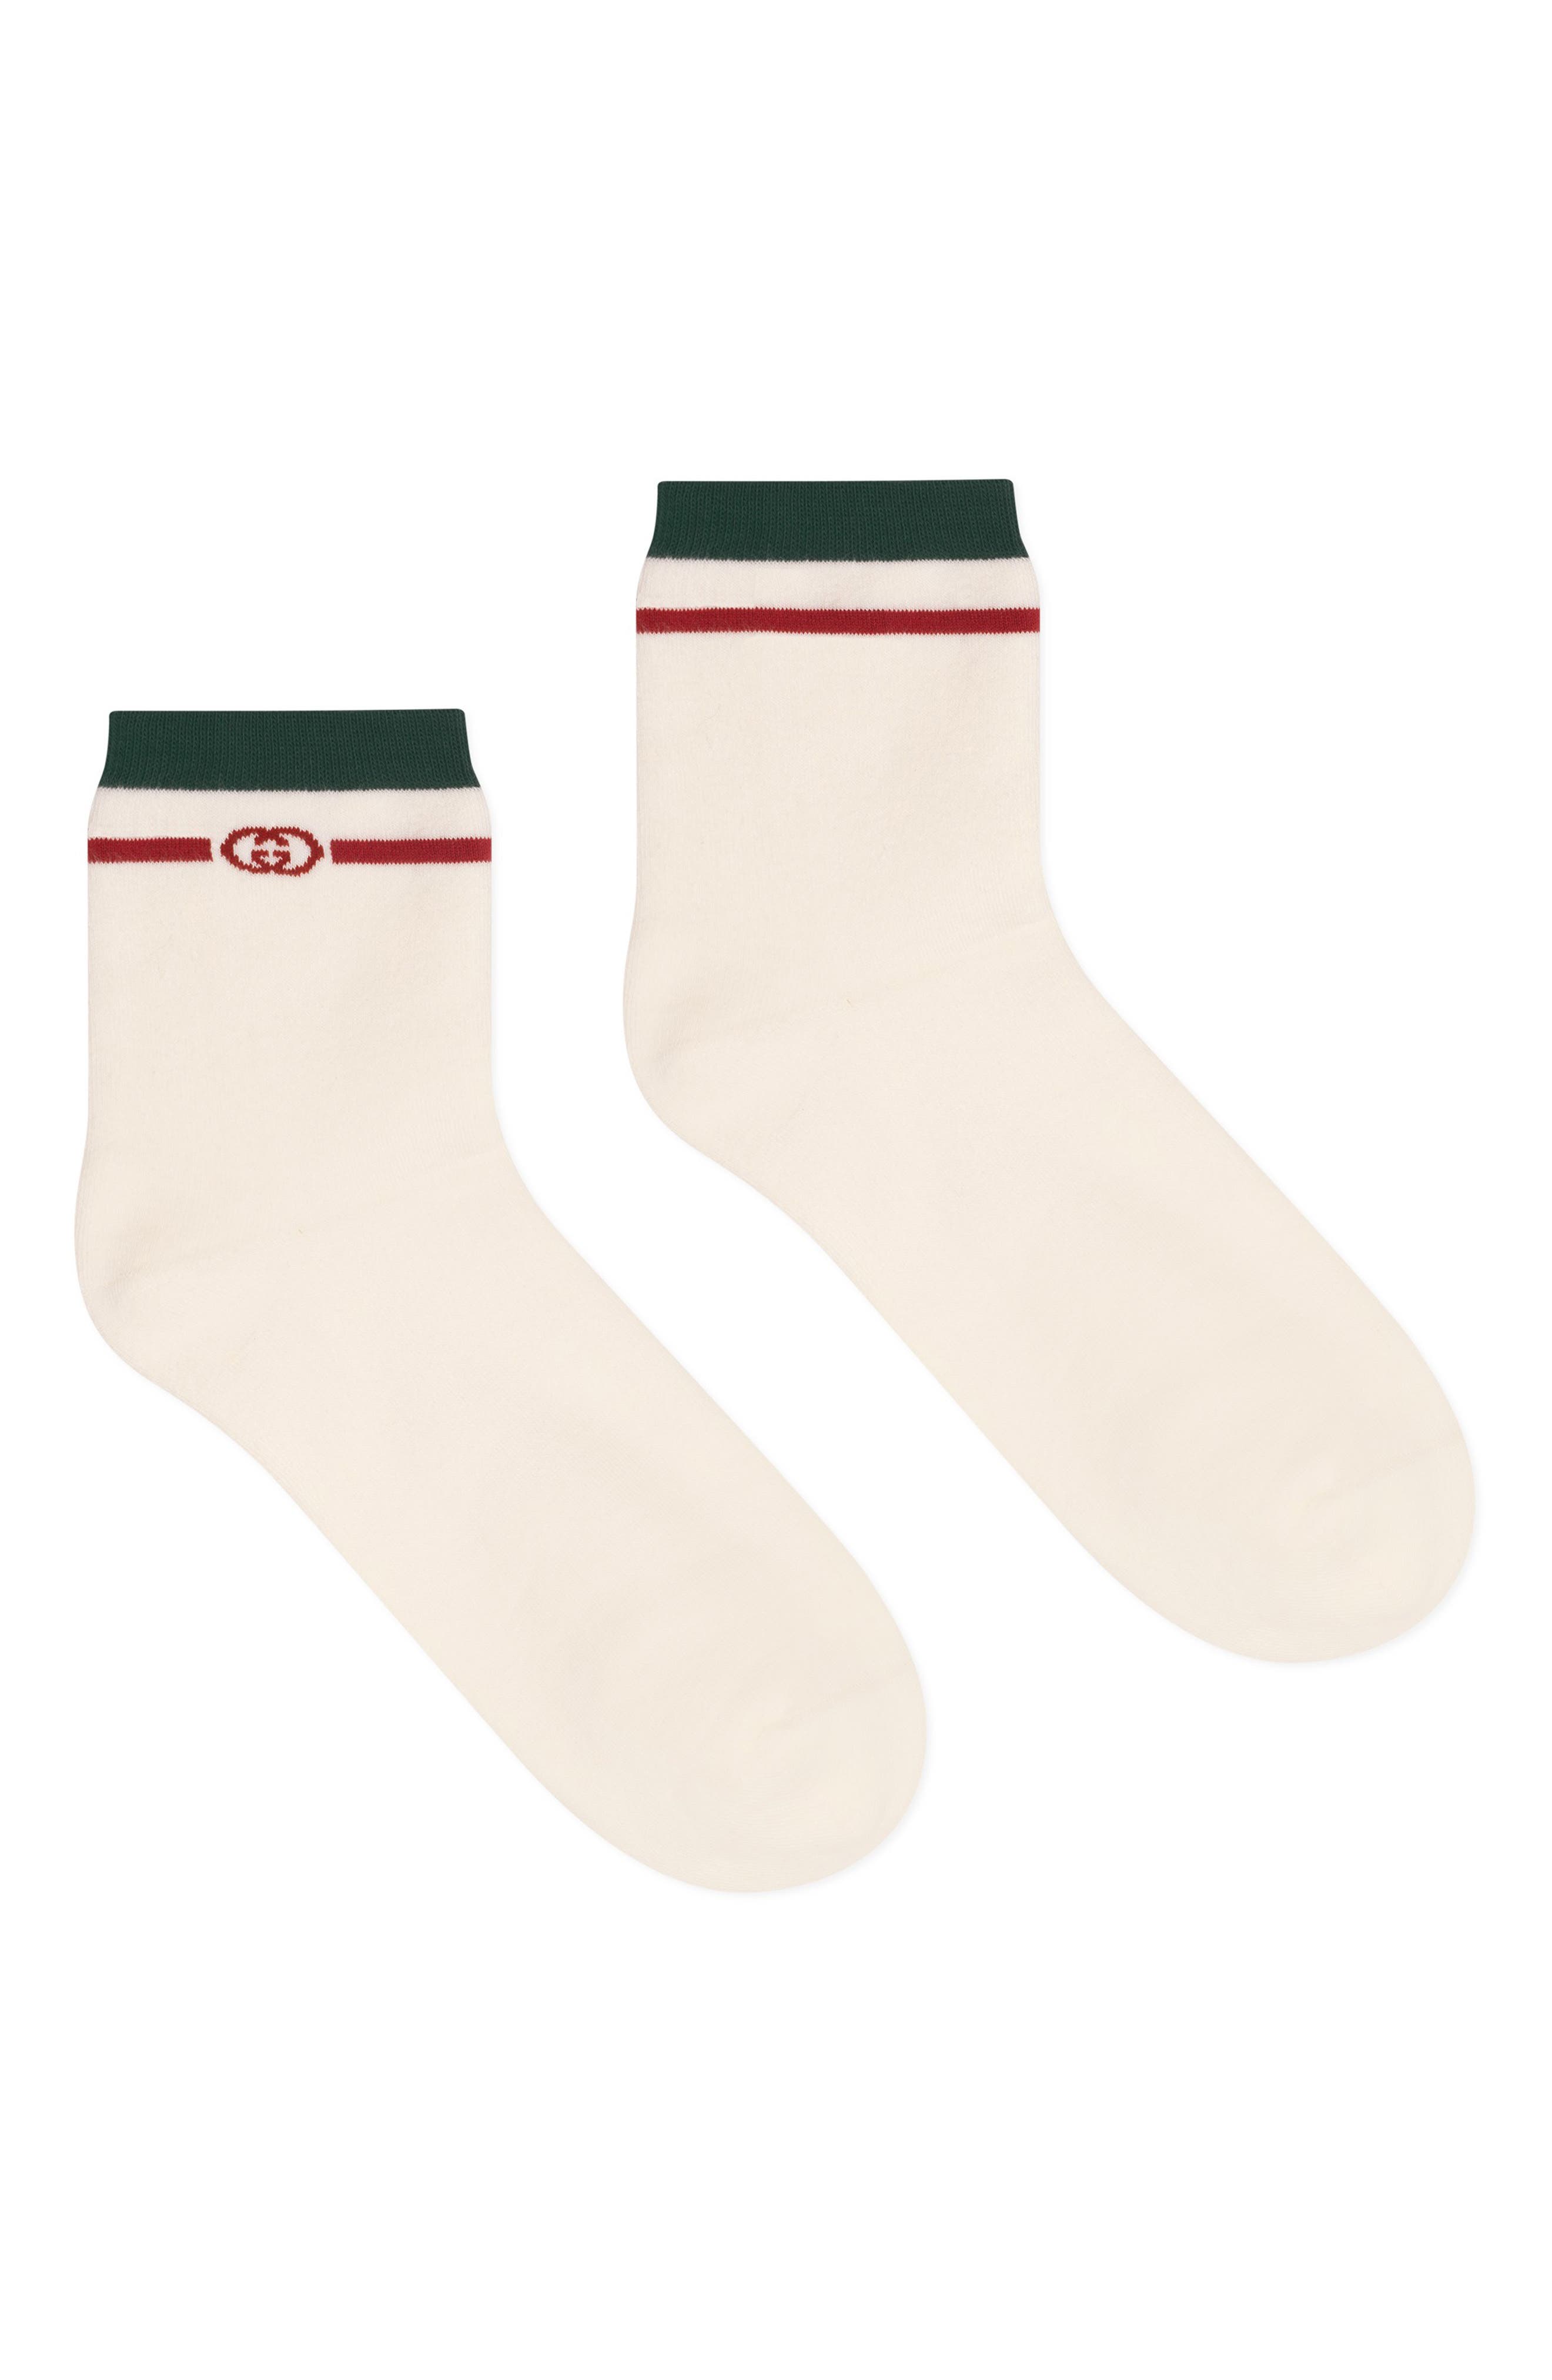 gucci stockings nordstrom